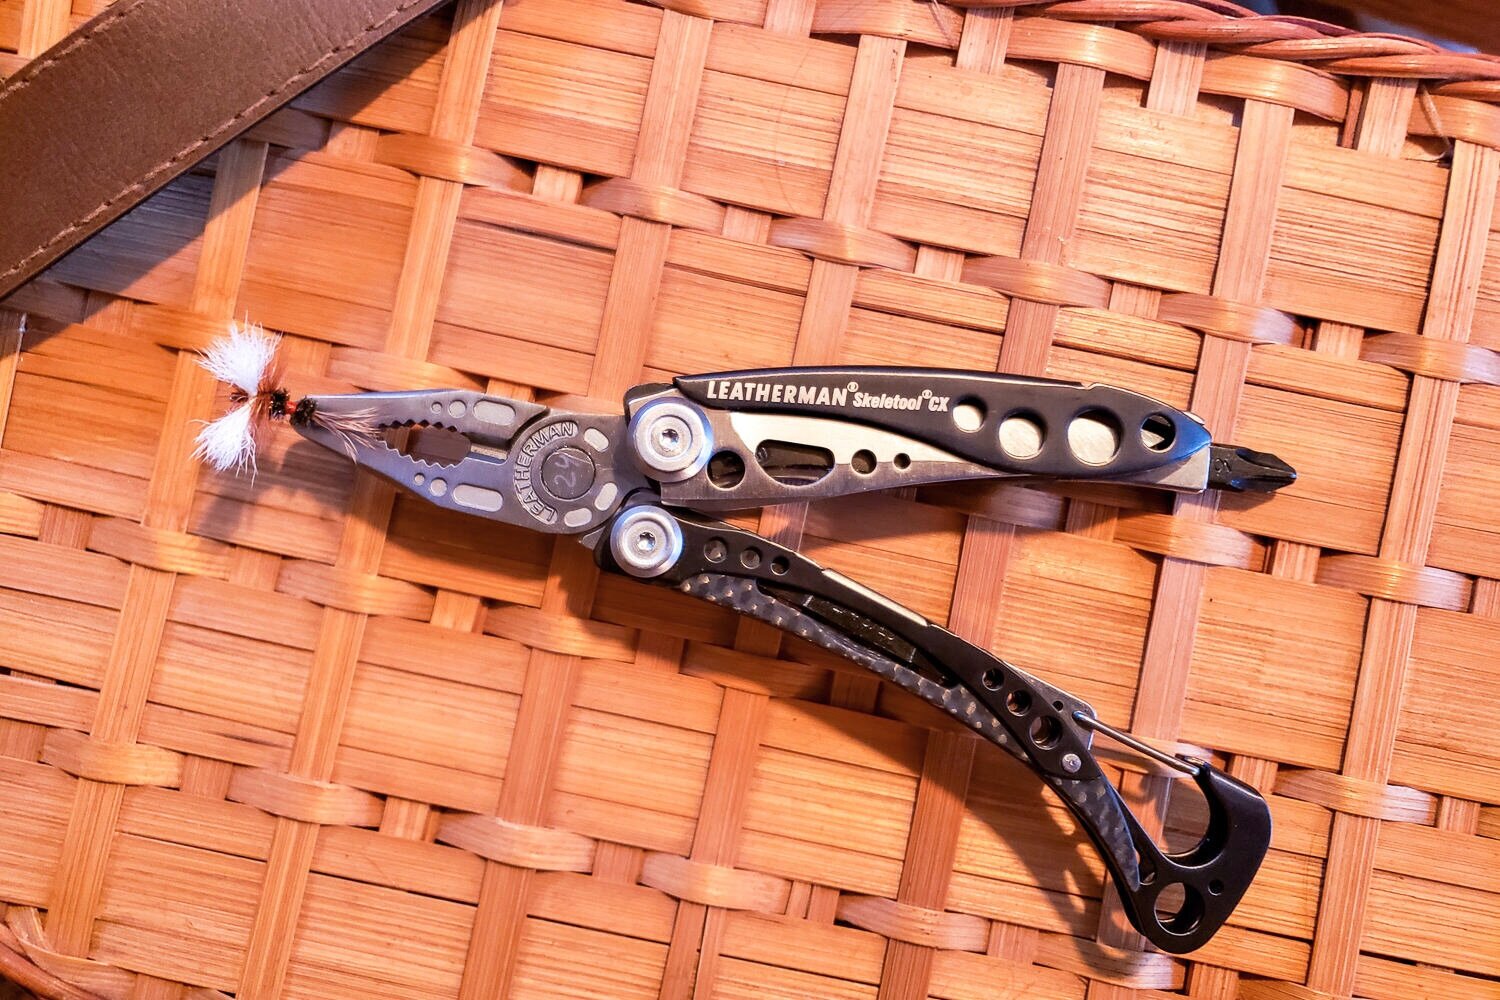 The Leatherman Skeletool CX is a compact & streamlined multitool with an emphasis on the most important tools.